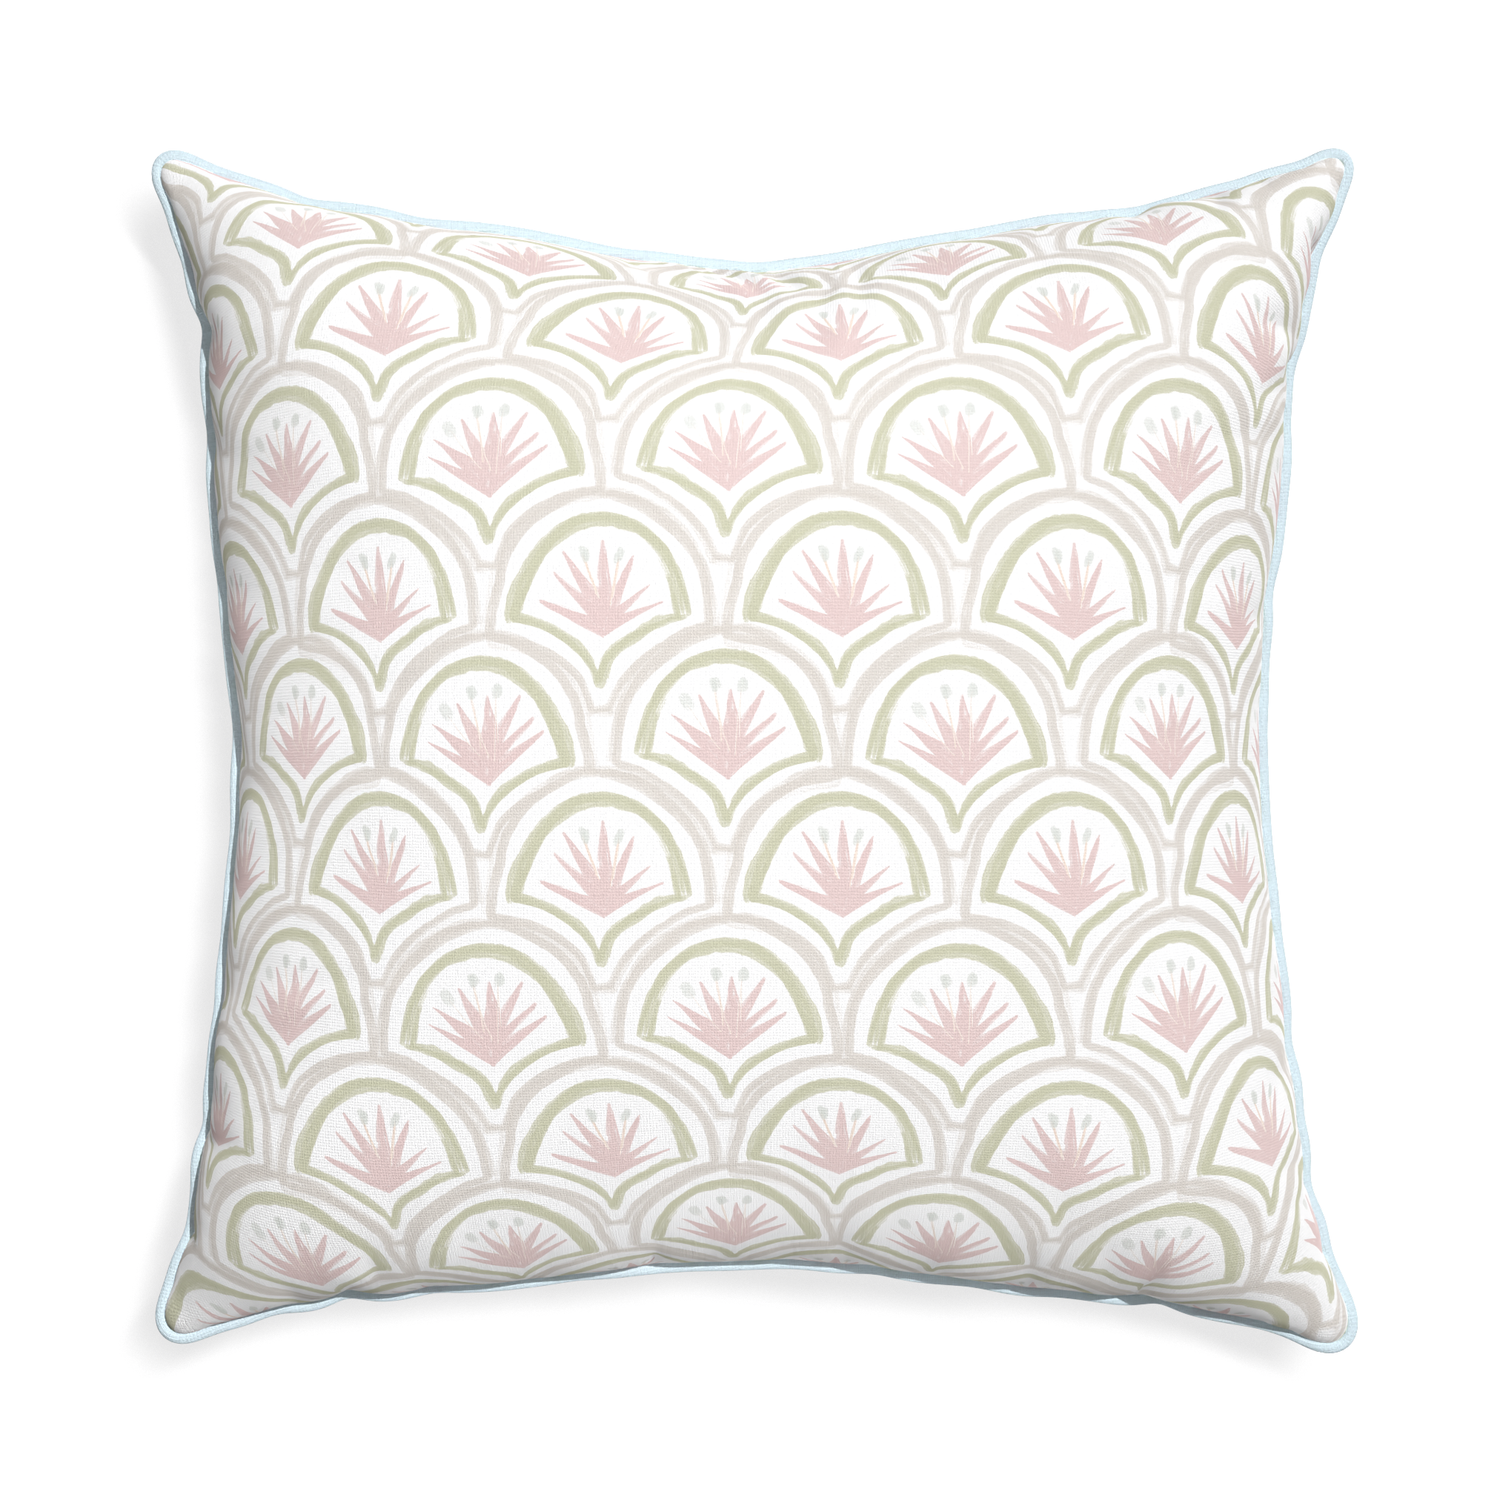 Euro-sham thatcher rose custom pillow with powder piping on white background